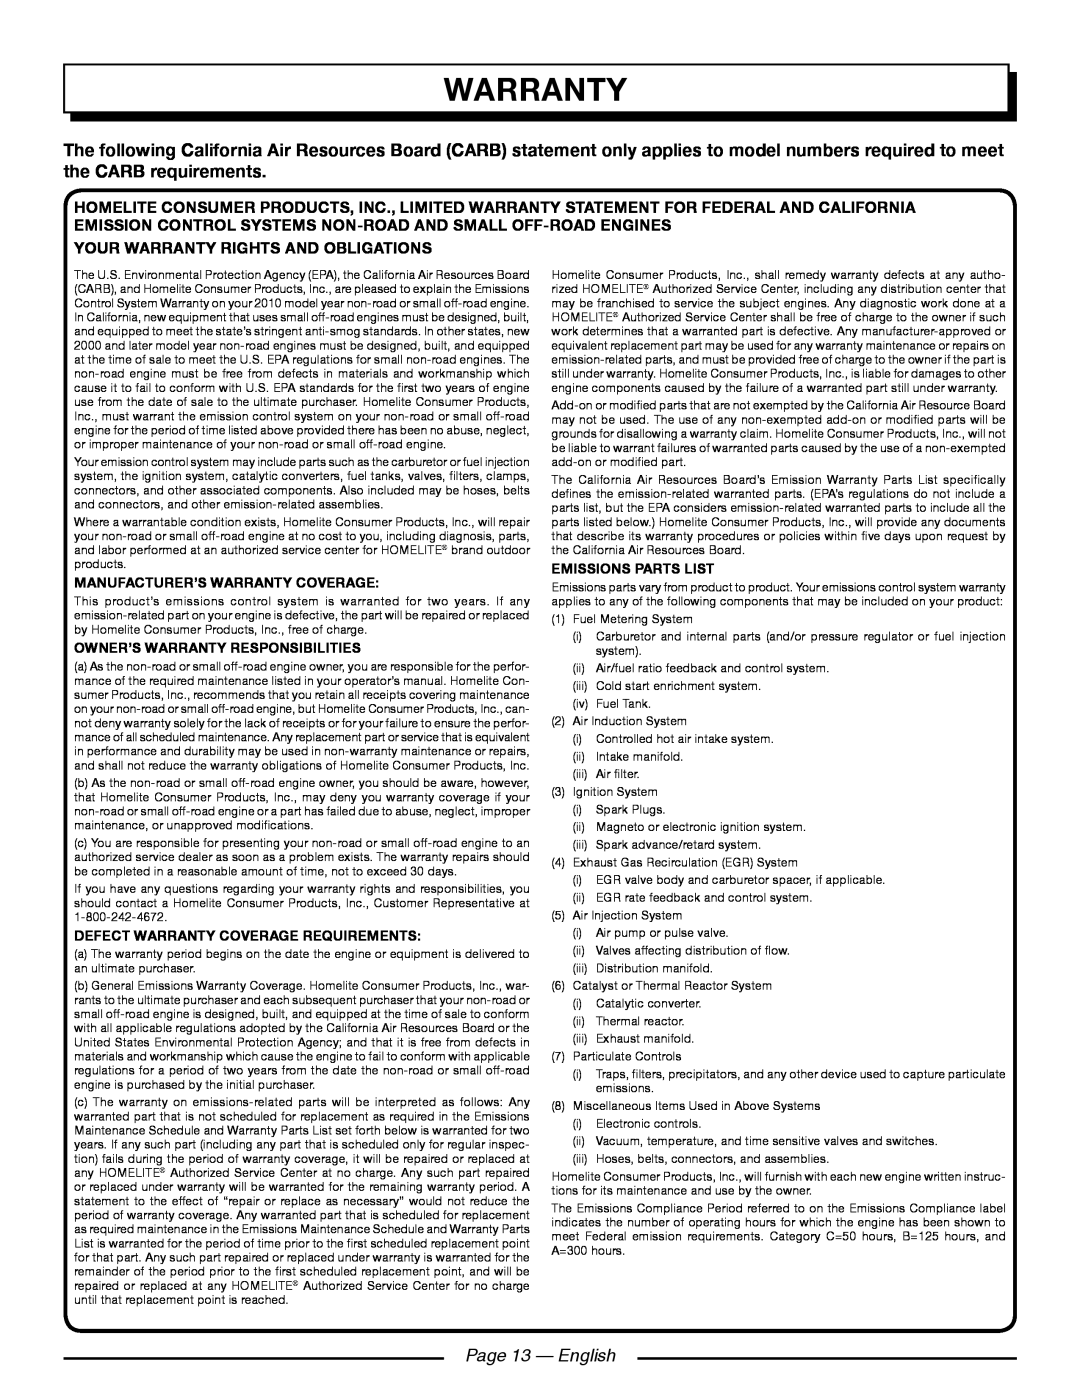 Homelite UT09521 Page 13 - English, Manufacturer’S Warranty Coverage, Owner’S Warranty Responsibilities 